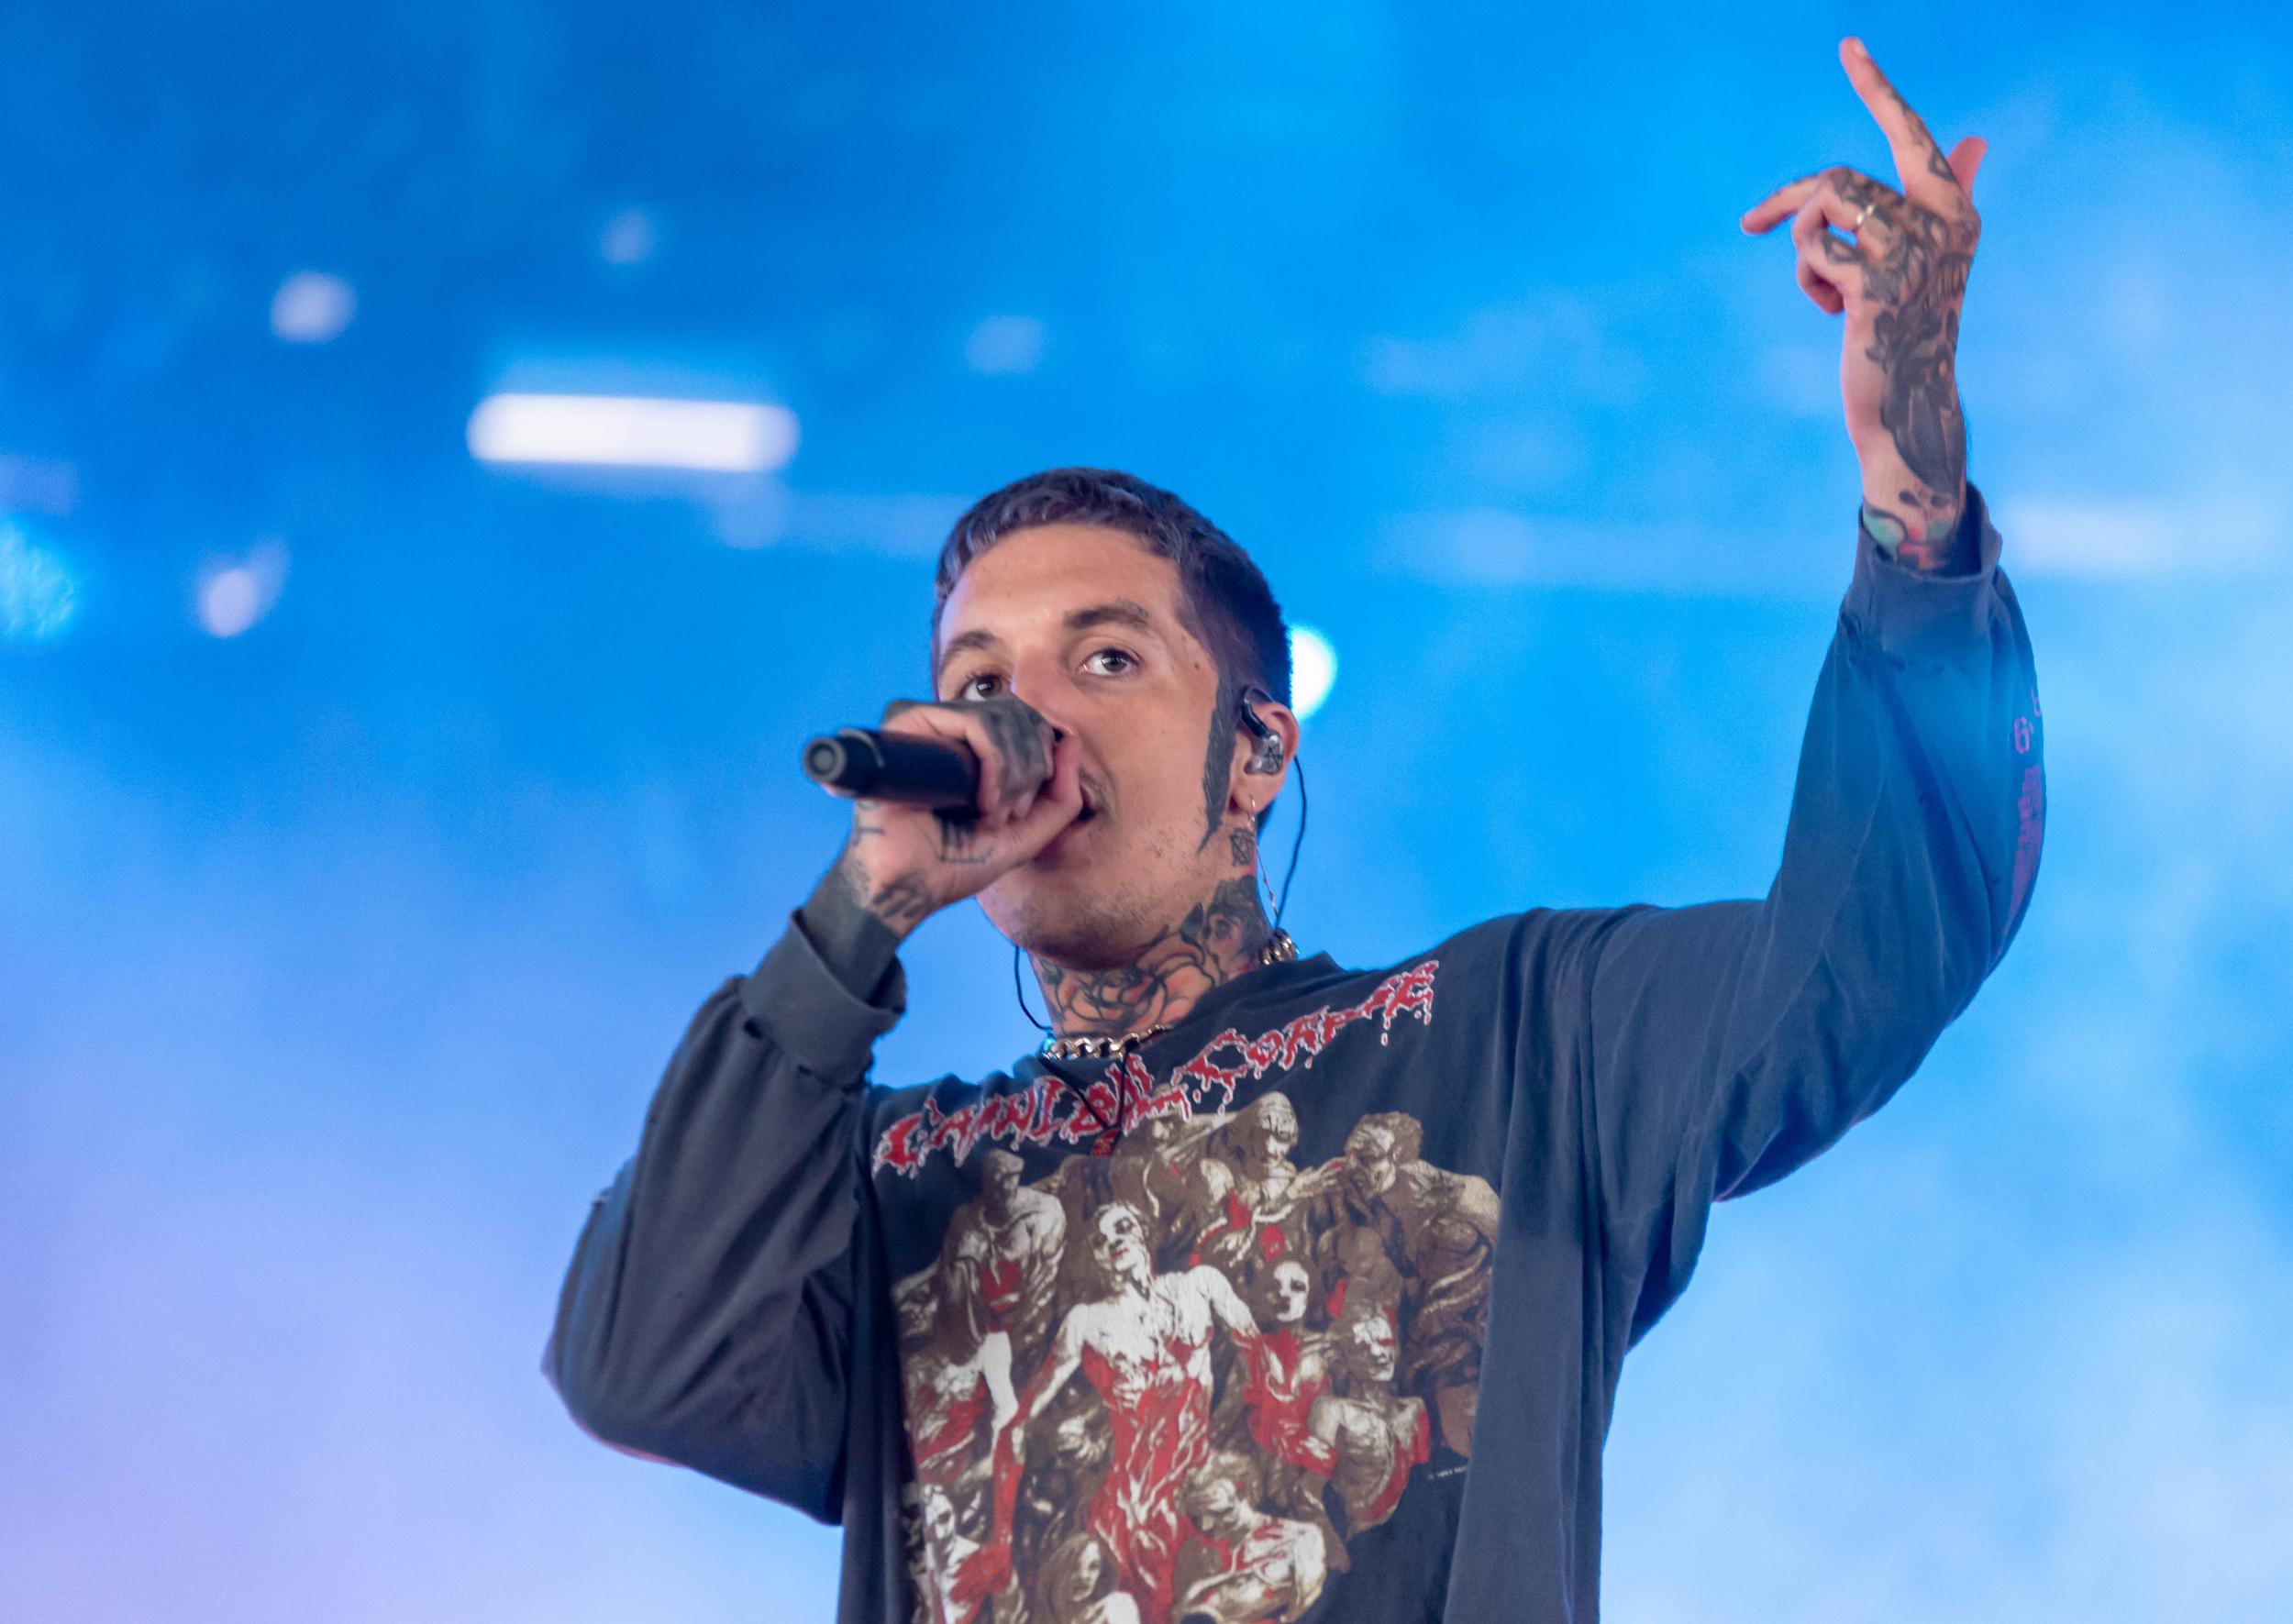 Bring Me The Horizon frontman Oli Sykes attacked onstage in Salt Lake City  – video